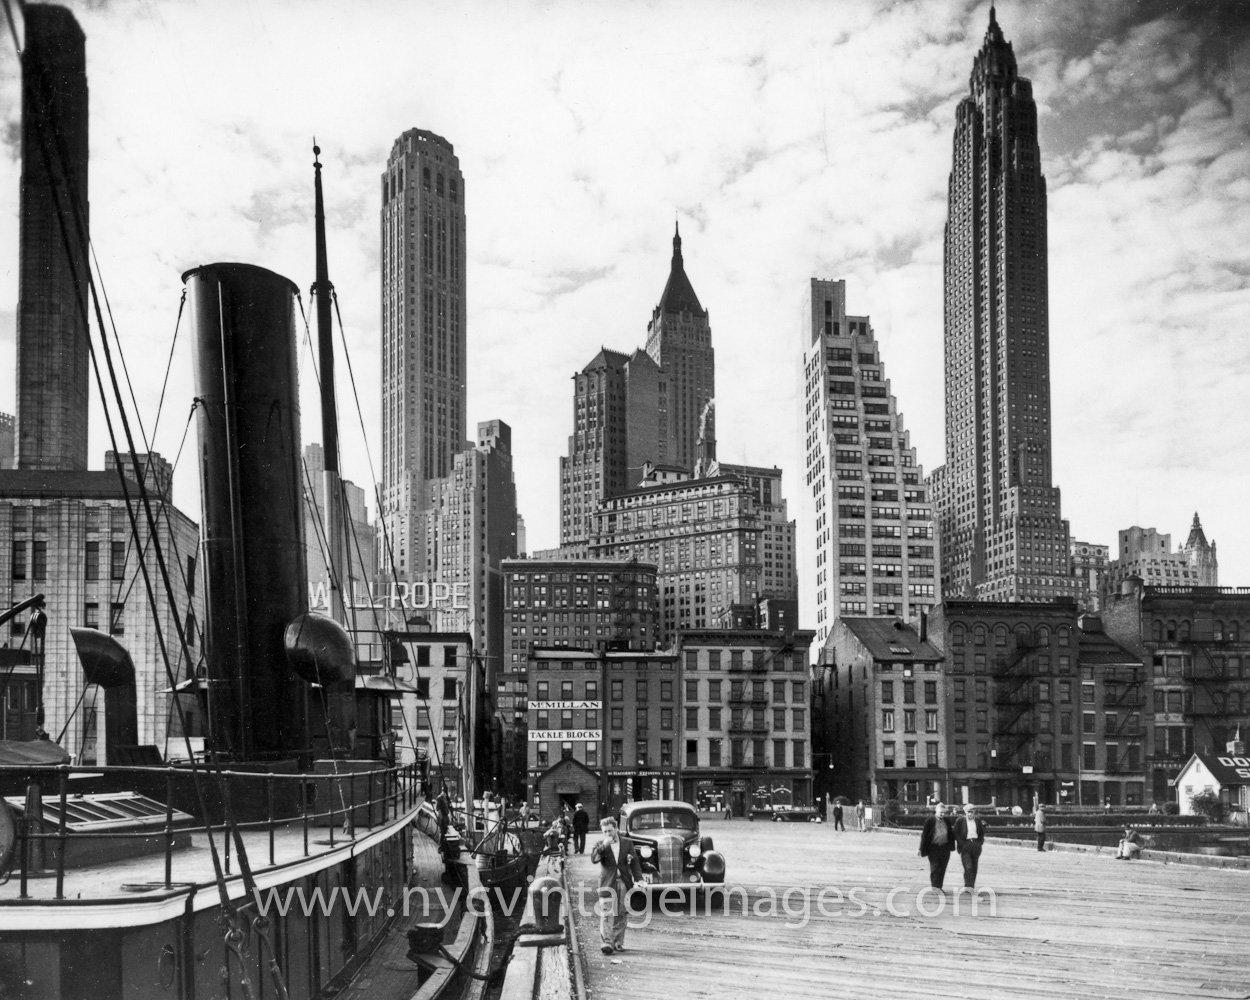 NYC Vintage Image. Old Picture of New York